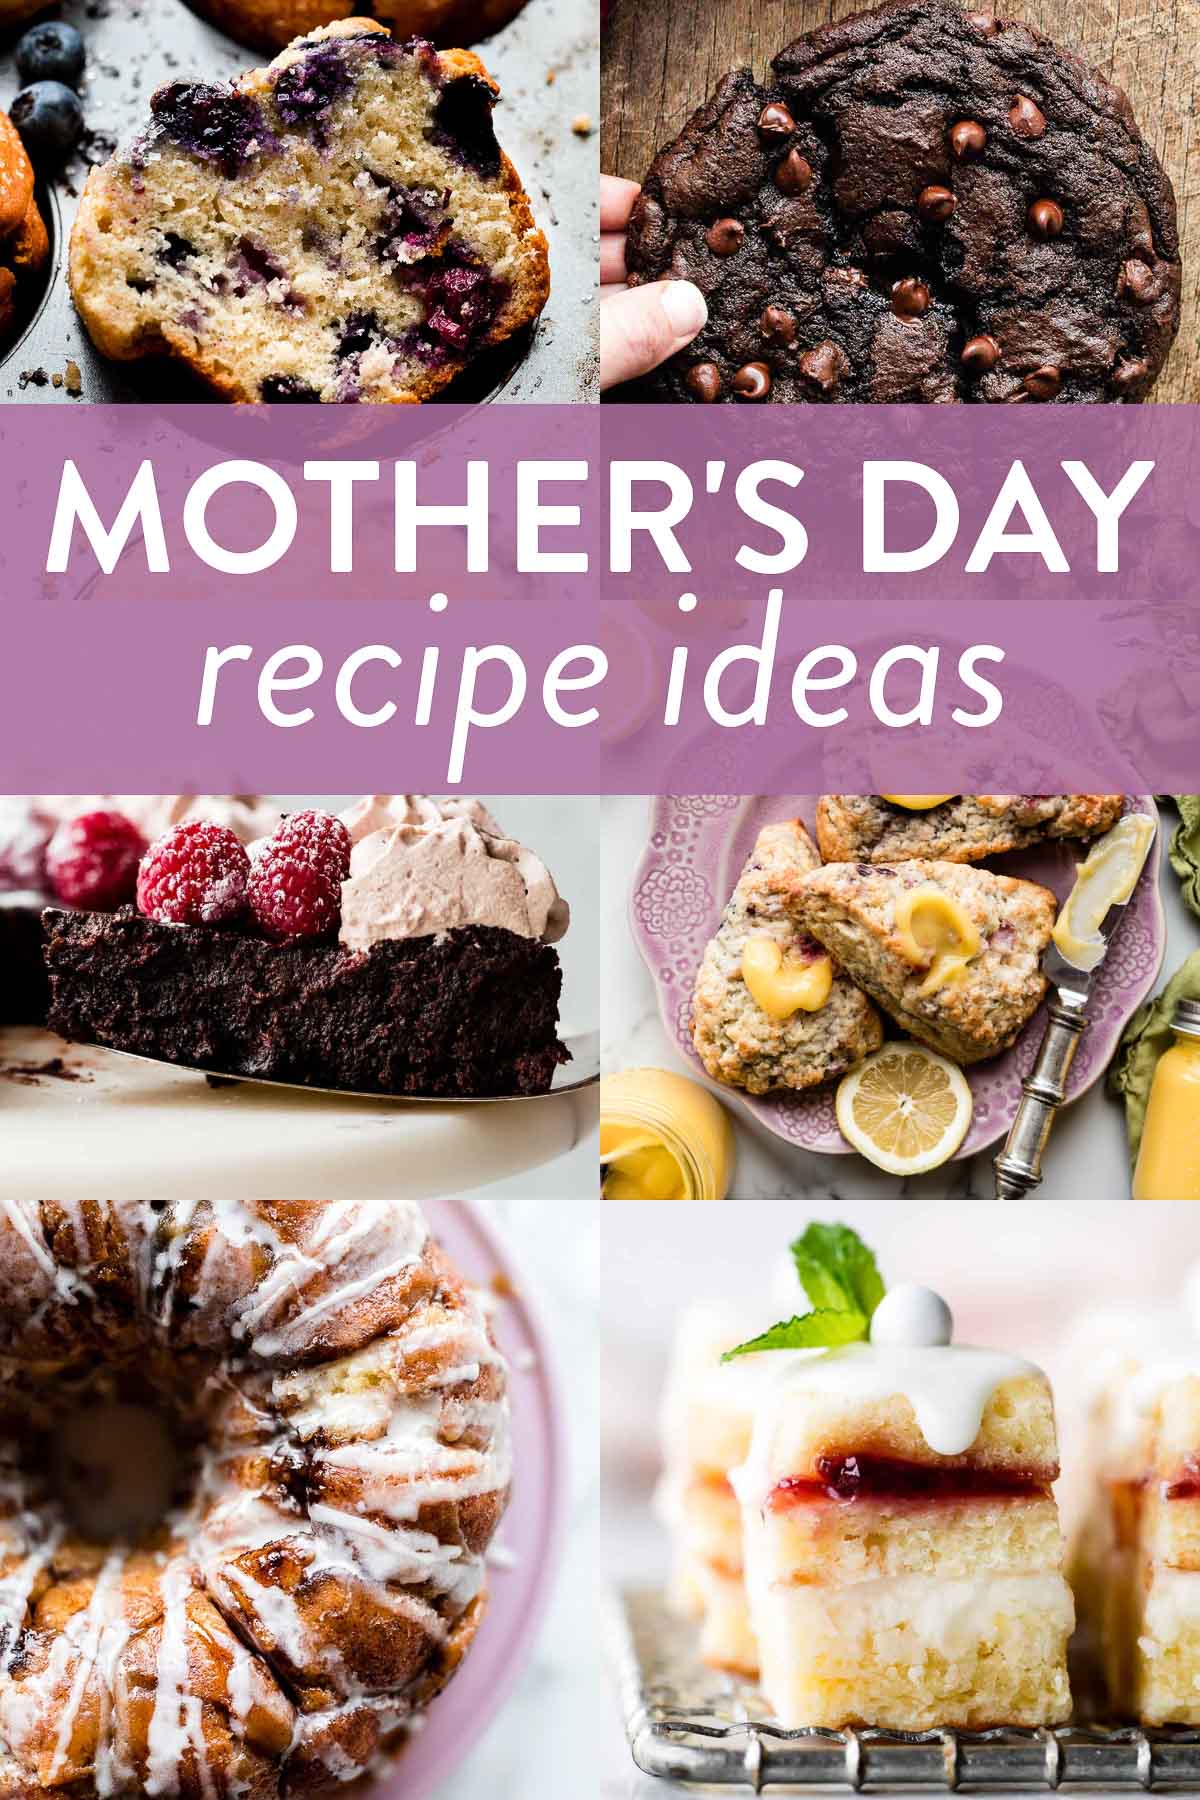 collage of Mother's Day recipes including monkey bread, petit fours, scones and lemon curd, flourless chocolate cake slice, and muffins.